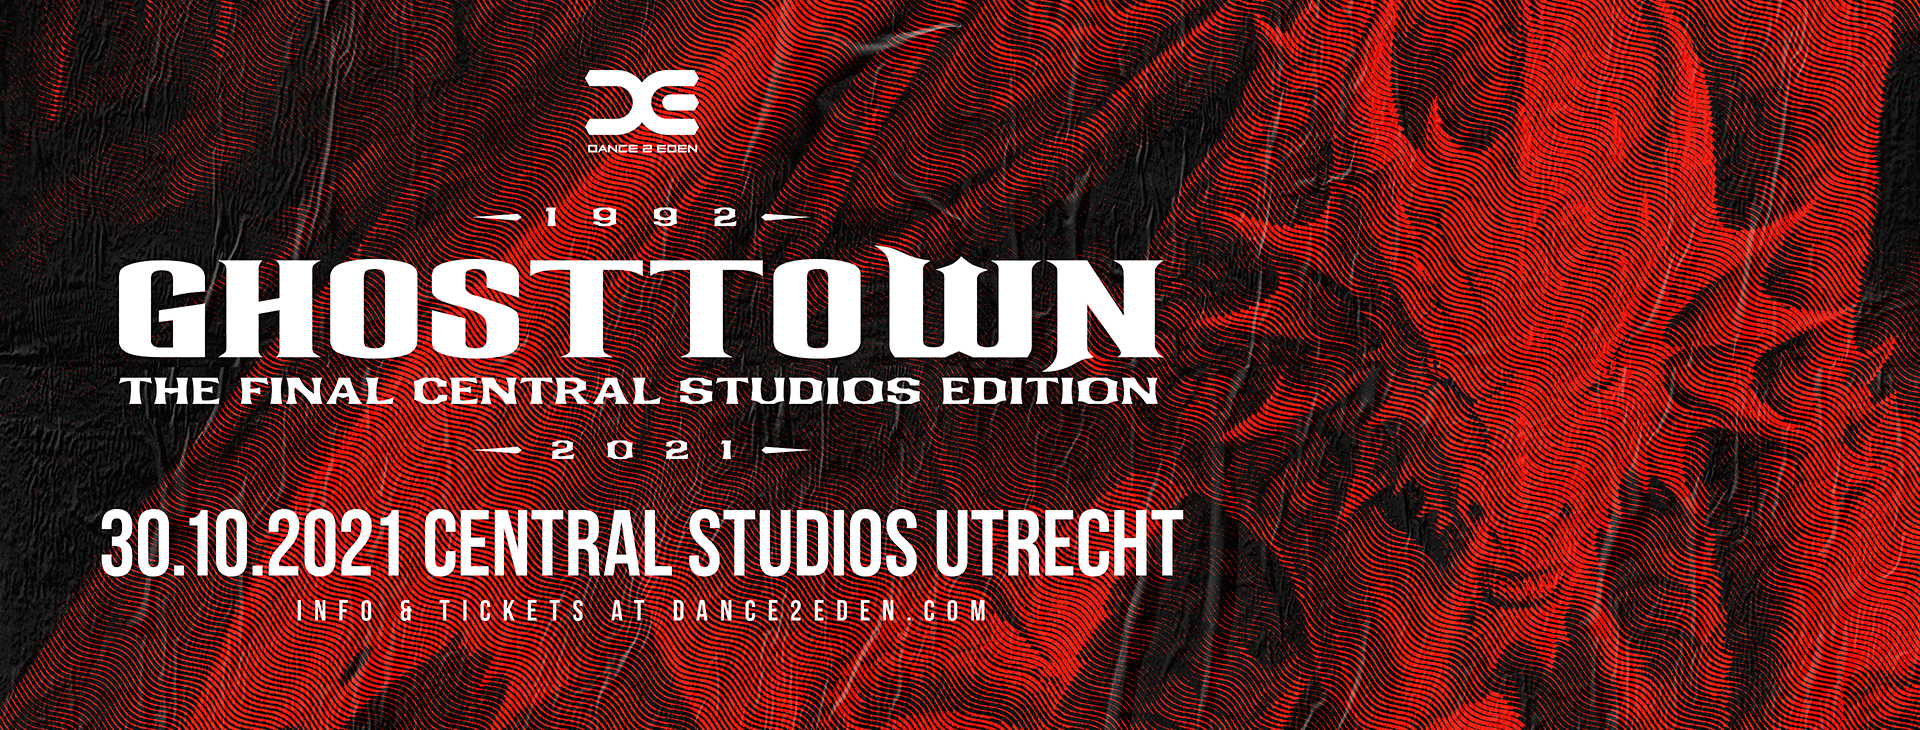 Ghosttown is definitely going to happen on the 30th of October.. But before midnight!